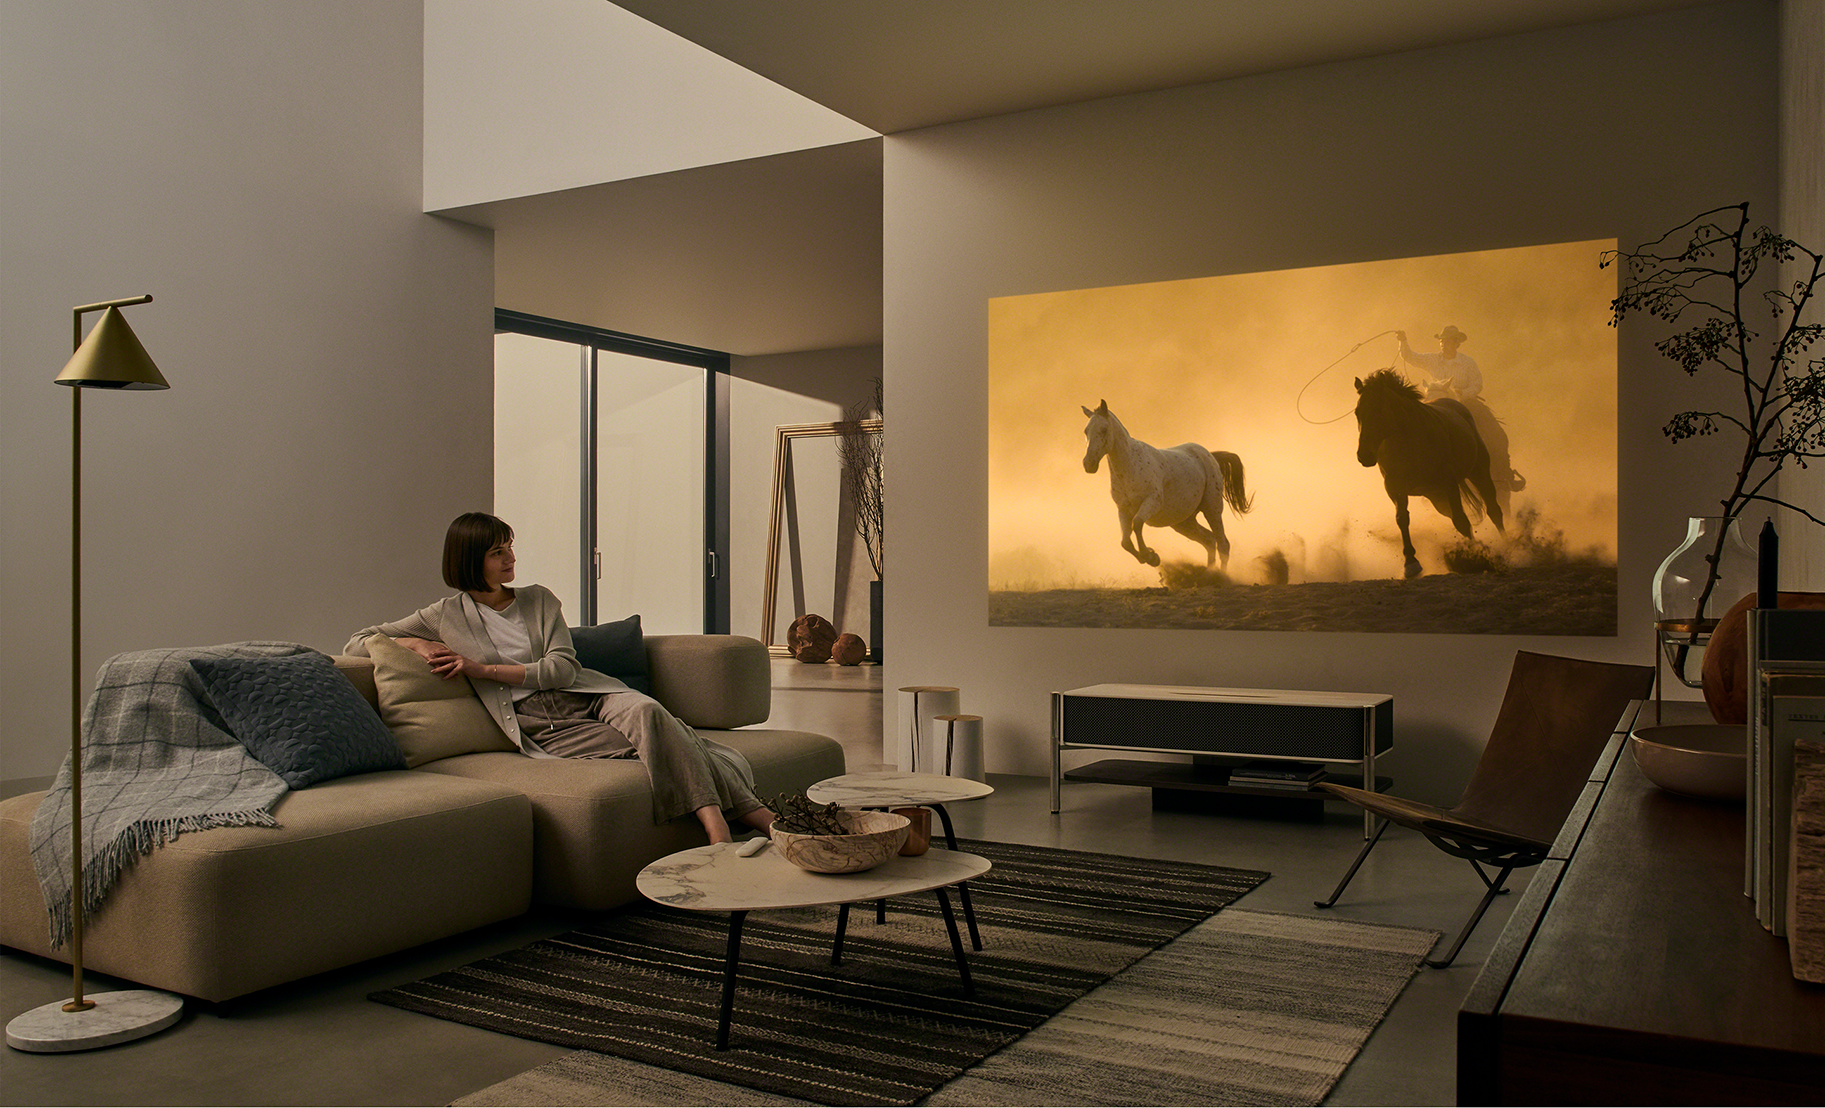 Sony blurs the line between technology and interior design with their 4k Ultra Short Throw Projector